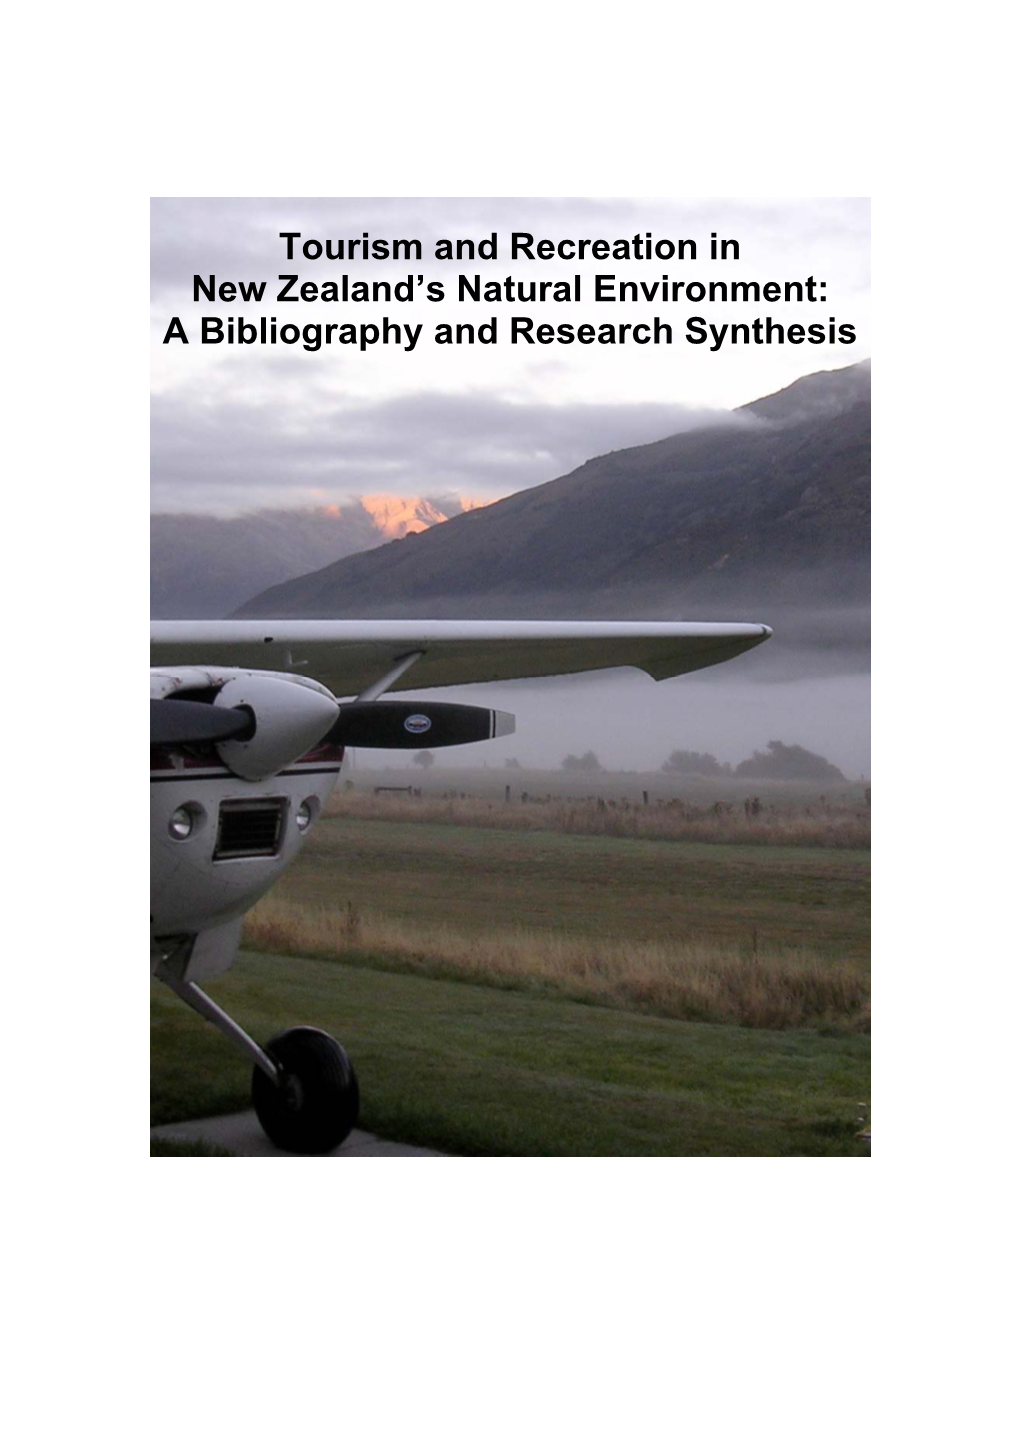 Tourism and Recreation in New Zealand's